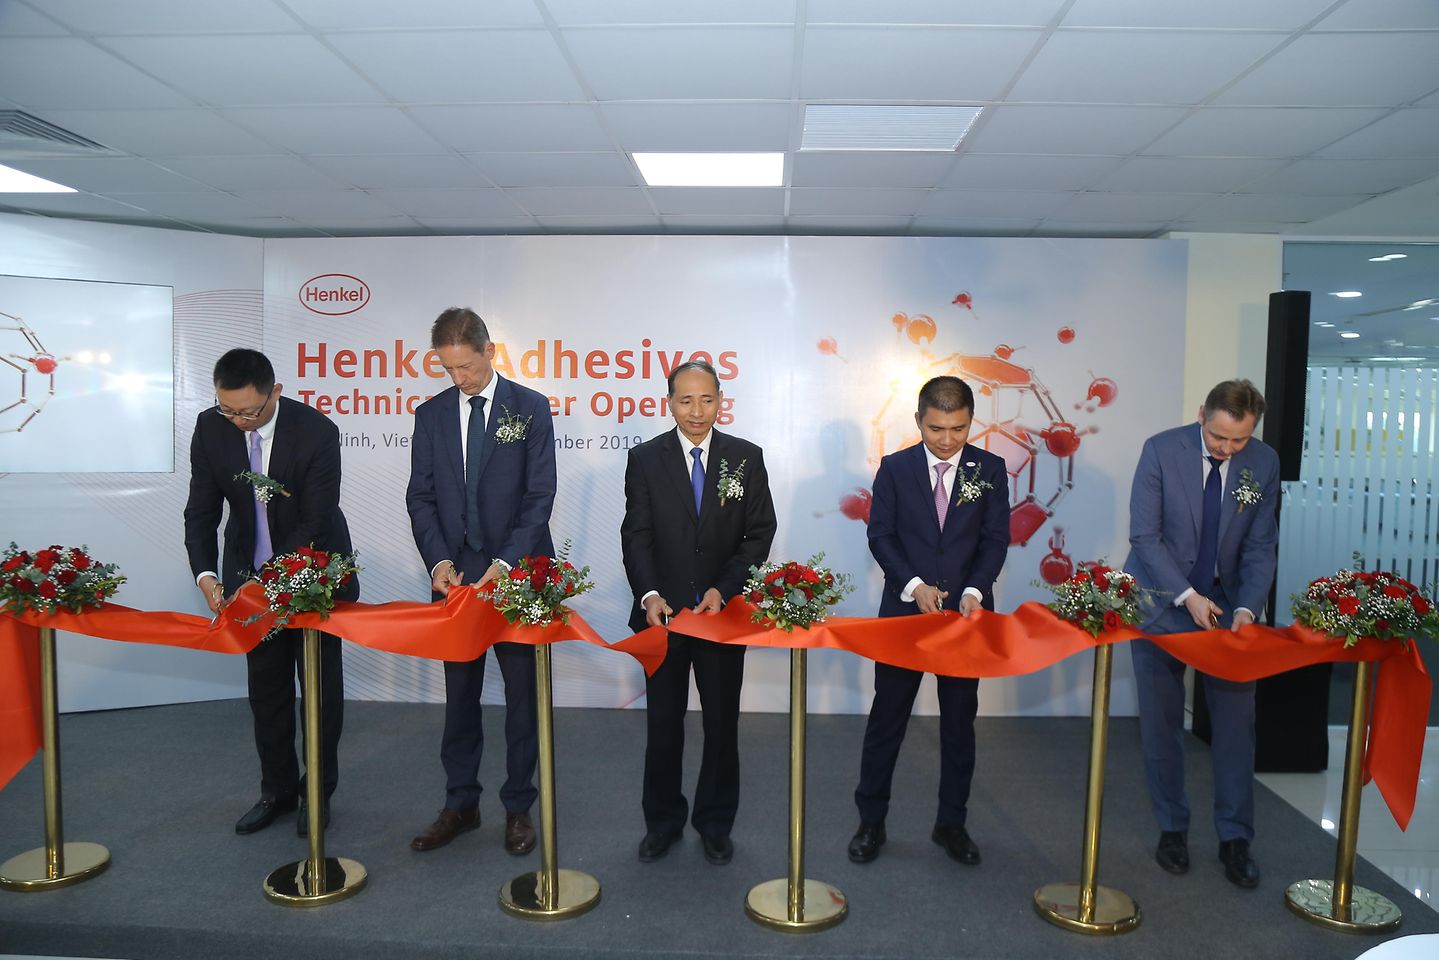 Opening ceremony of the new Henkel Adhesives Technical Center in Vietnam 